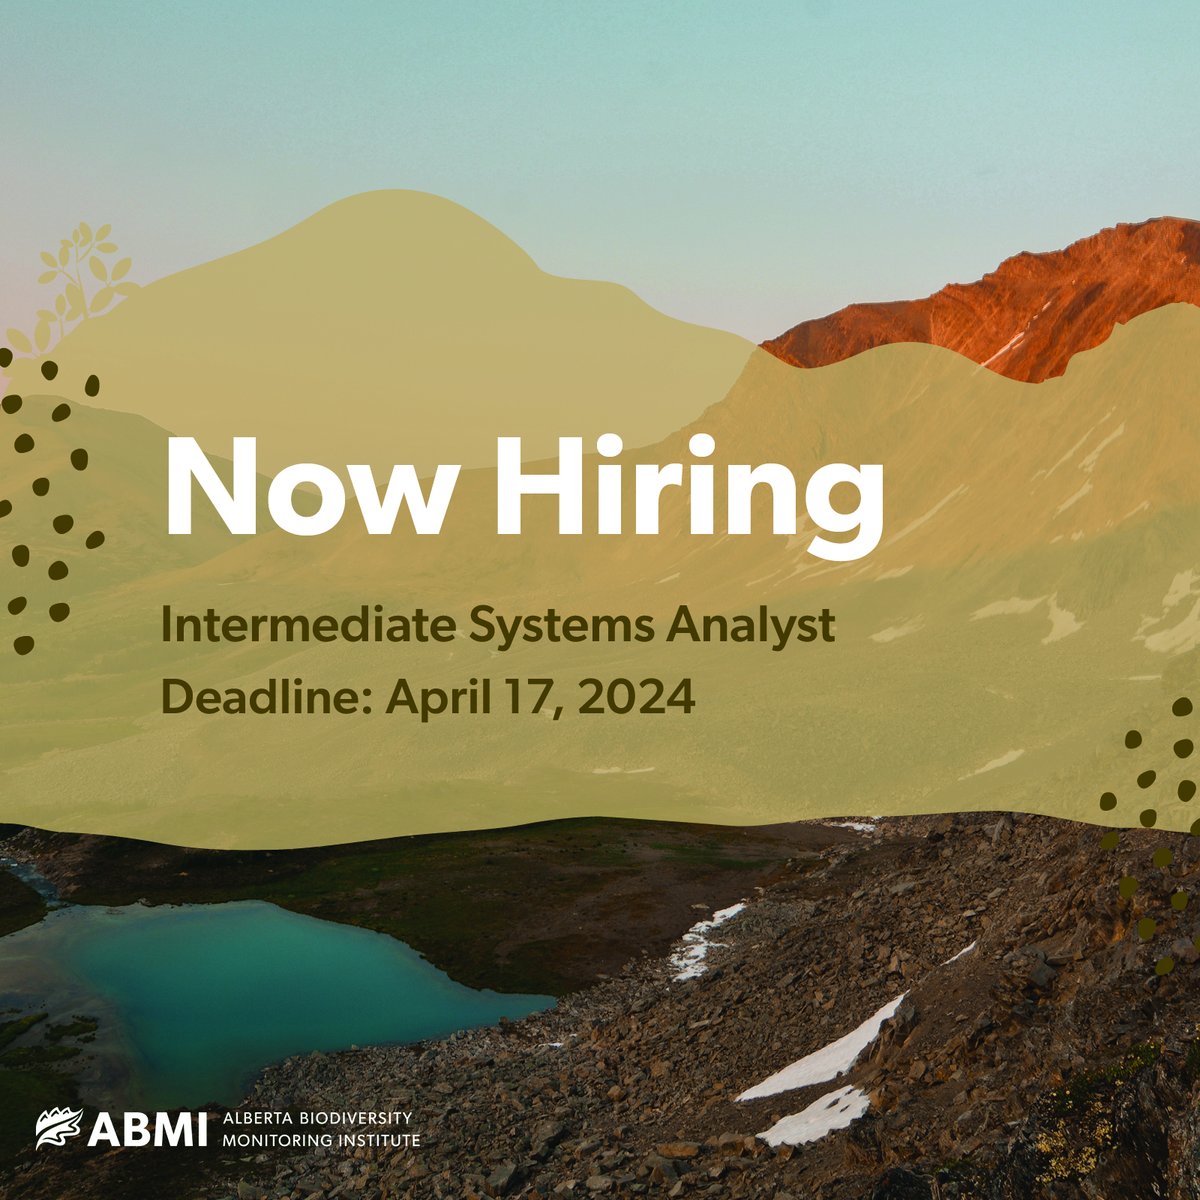 Join the ABMI as an Intermediate Systems Analyst!: ow.ly/t8ou50R3tF9

Deadline to apply is April 17.

#Jobs #Hiring #AlbertaJobs #softwaredevelopment #softwaresolutions #ITjobs